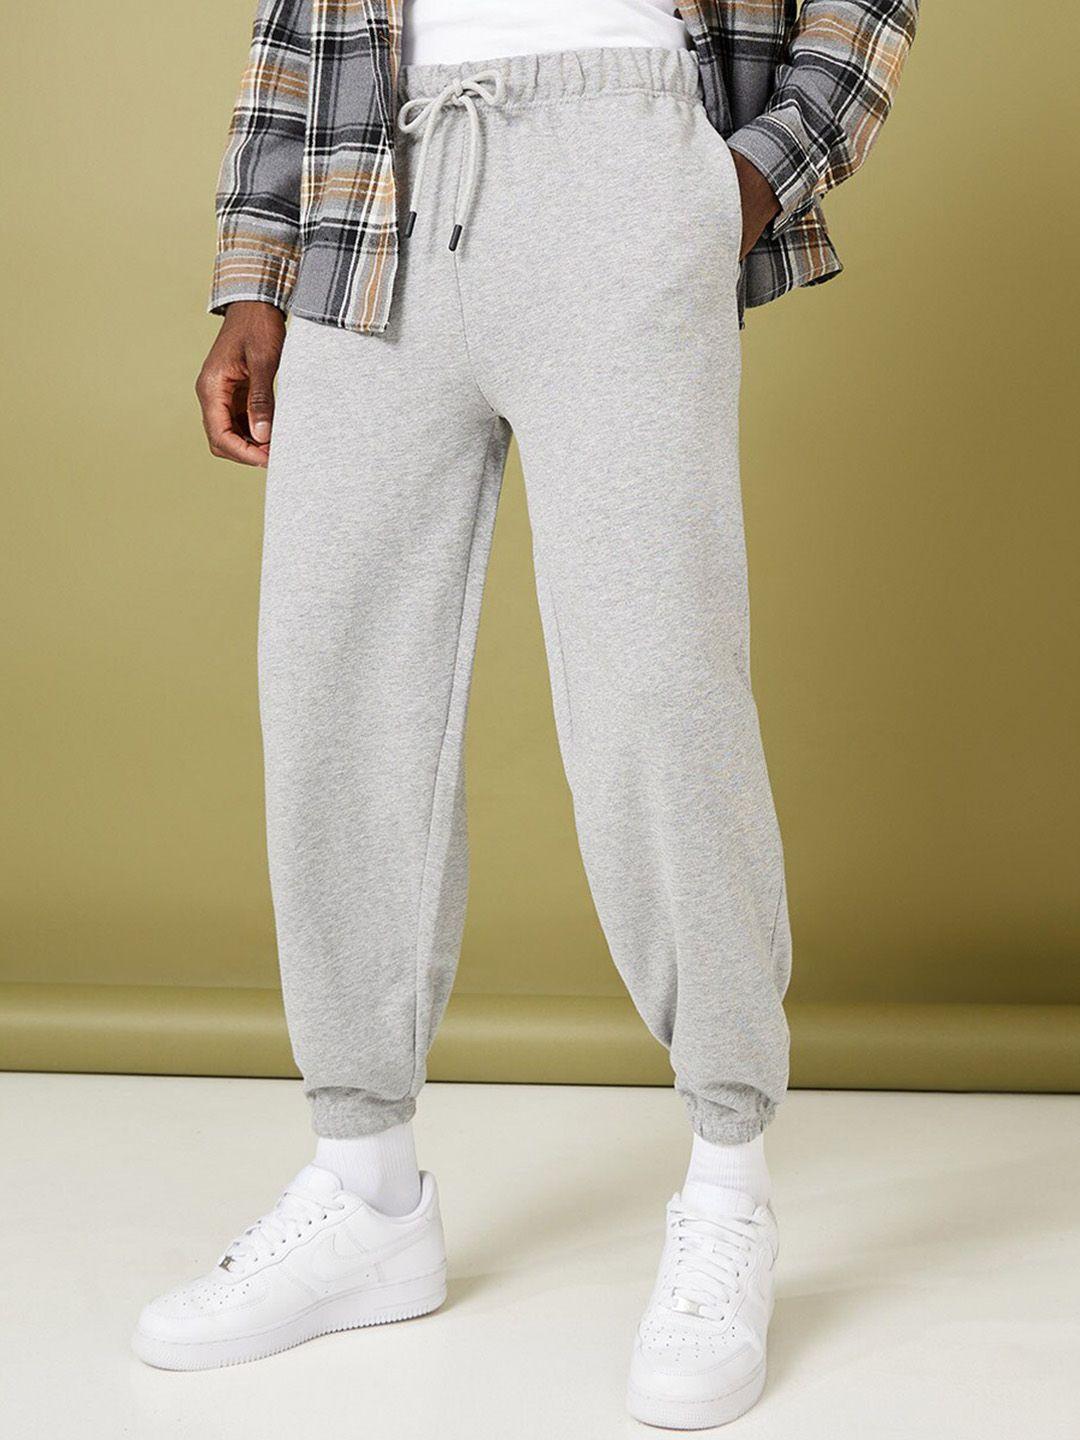 styli-men-pure-cotton-relaxed-fit-french-terry-jogger